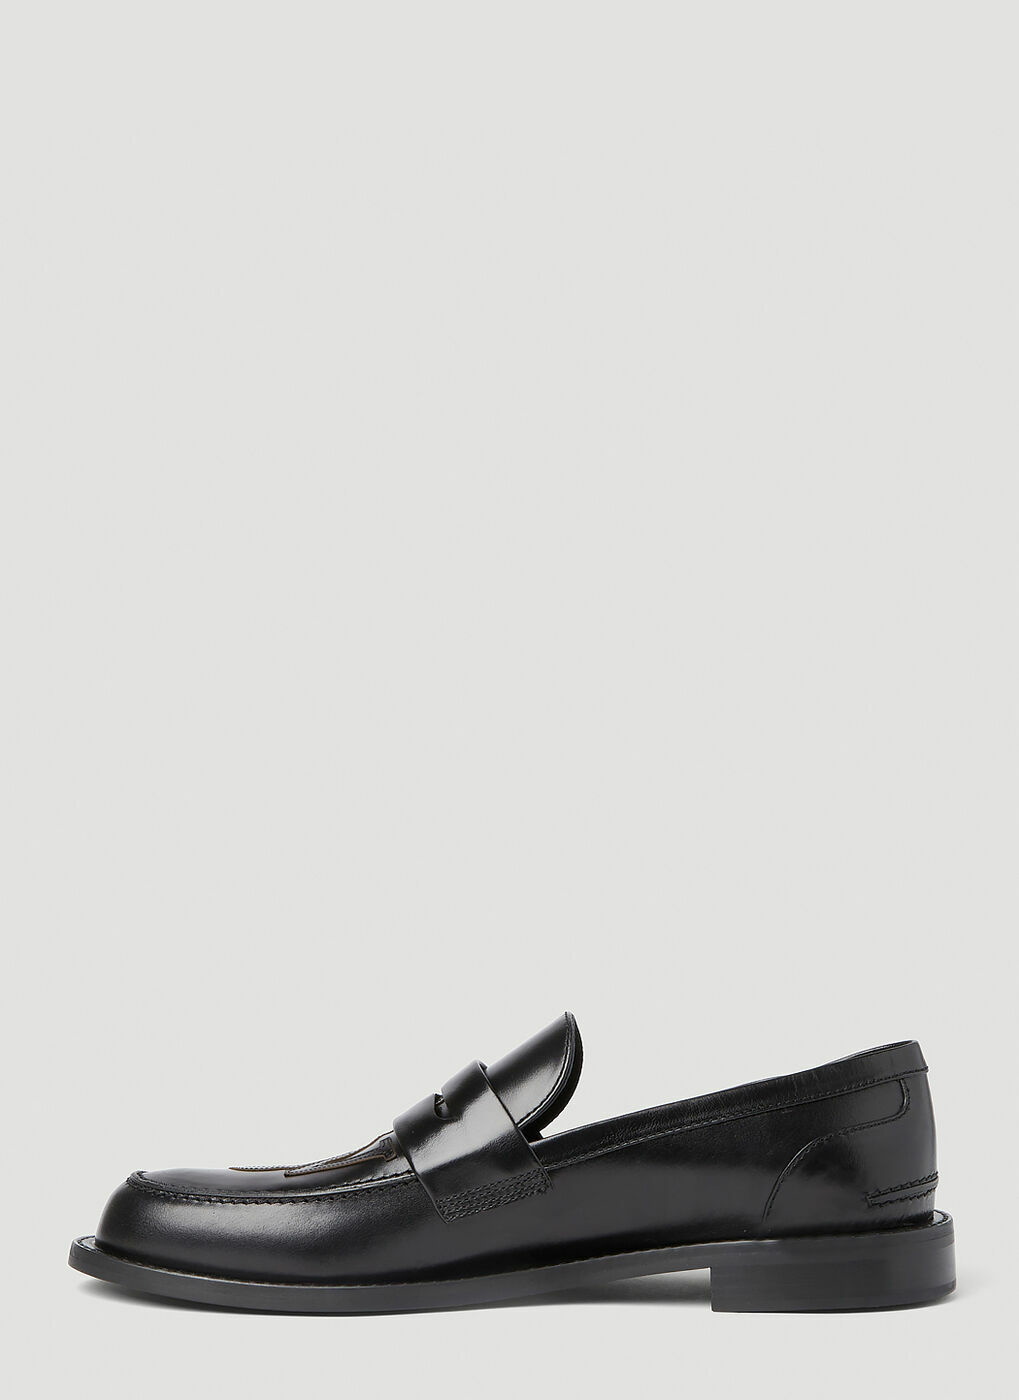 JW Anderson - Anchor Logo Loafers in Black JW Anderson